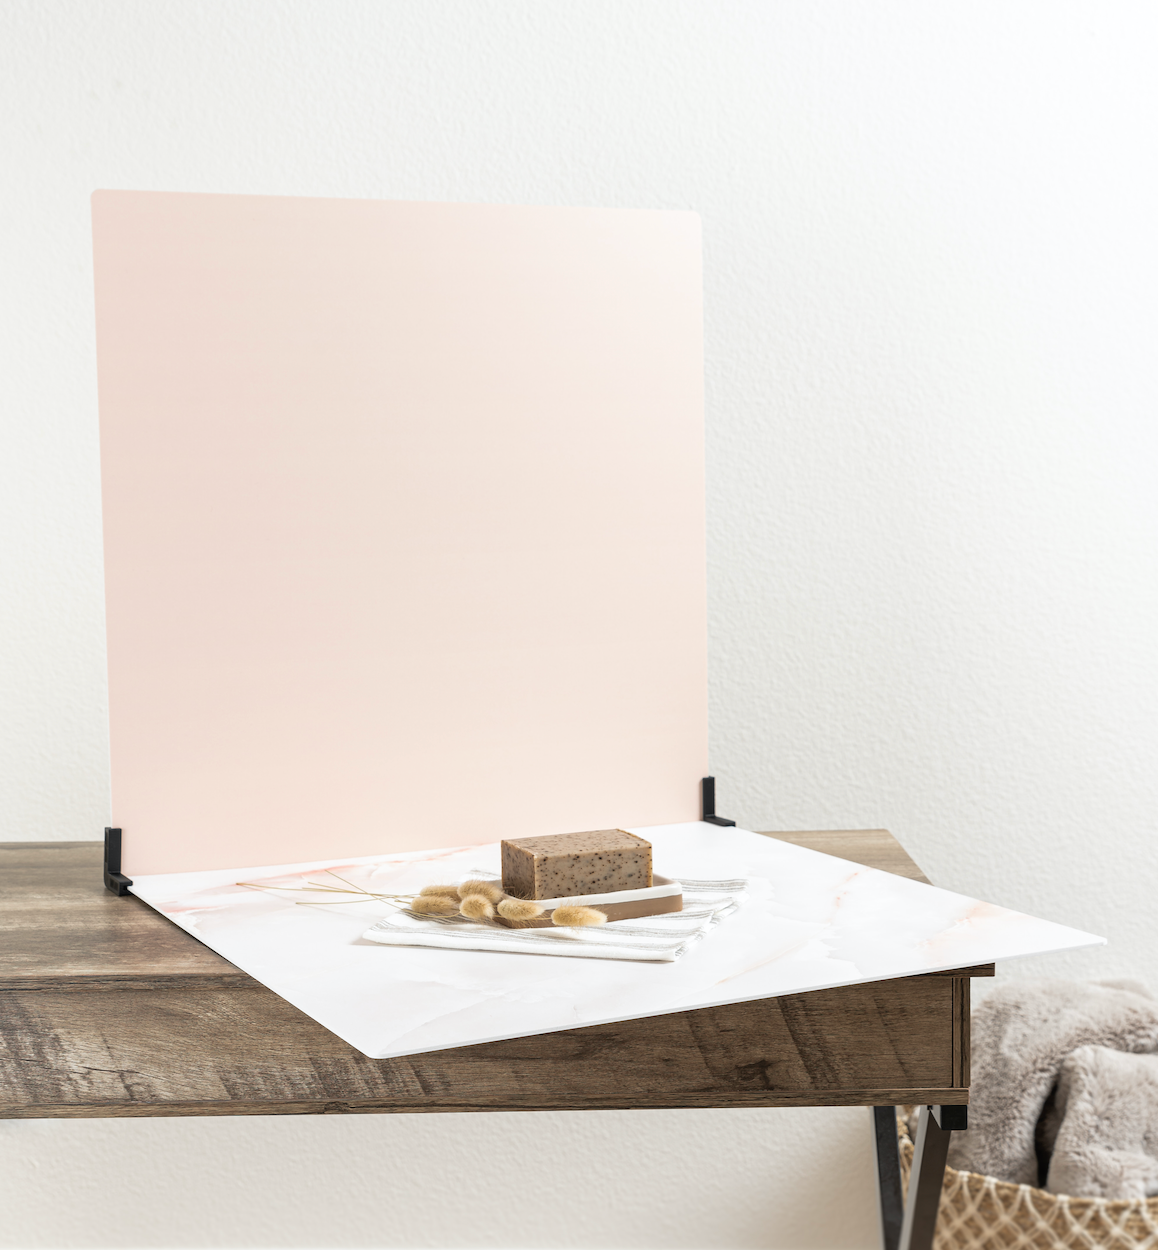 Champagne pink and marble photography backdrop for food and product photography. Available in vinyl backdrops and board backdrops